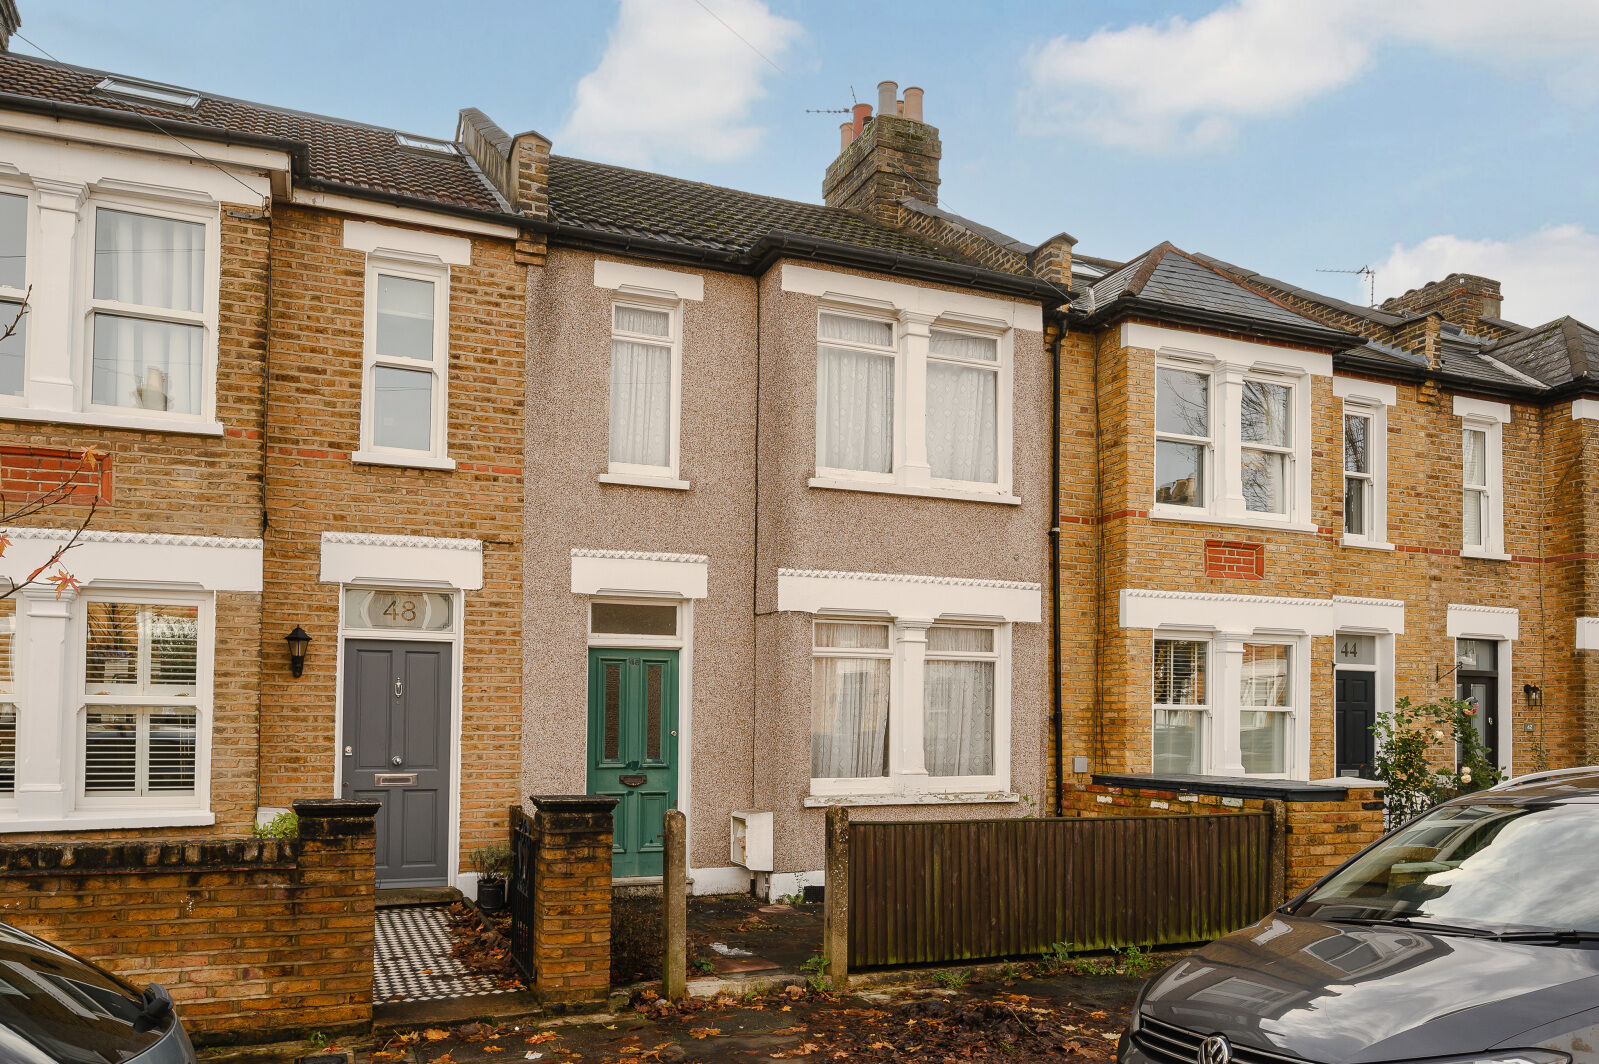 2 bedroom mid terraced house for sale Florence Road, Wimbledon, SW19, main image